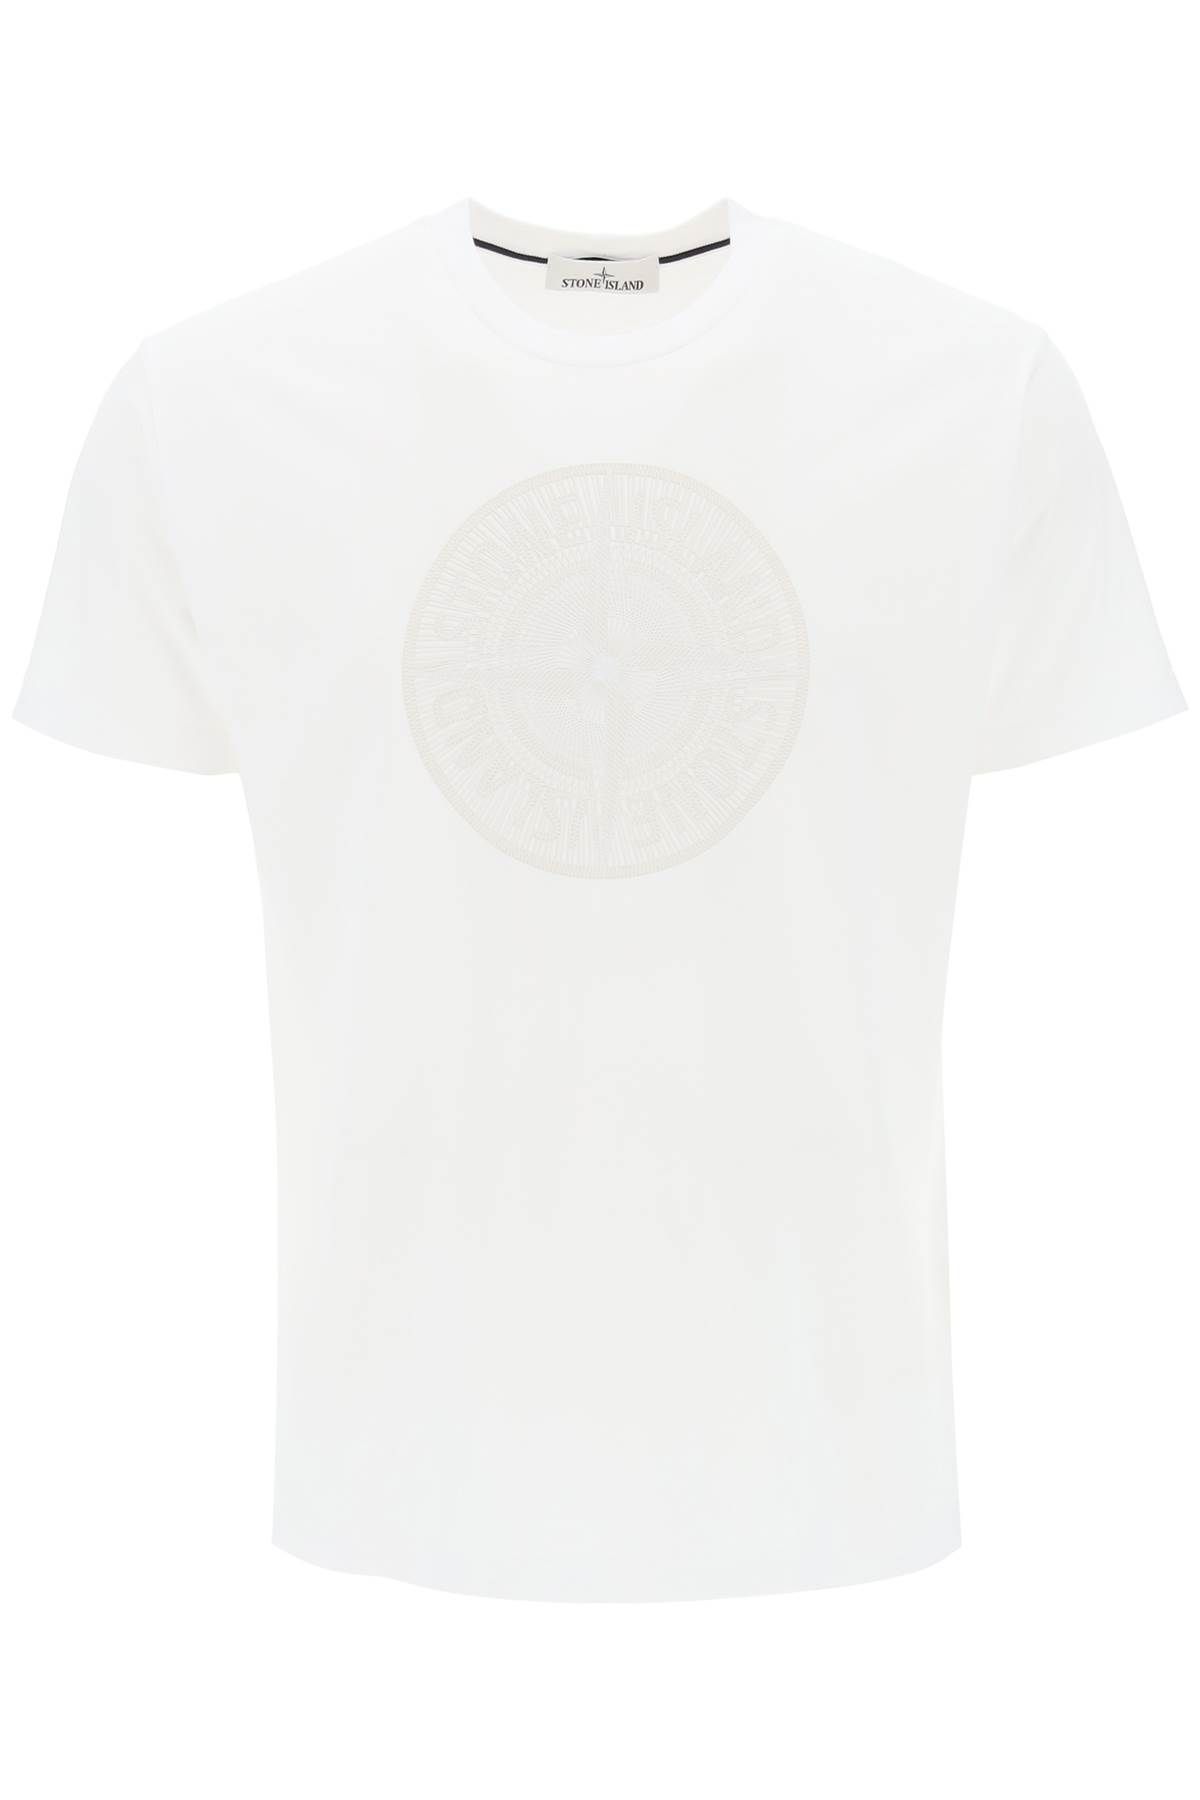 Stone Island T-shirt With Print On The Chest In White